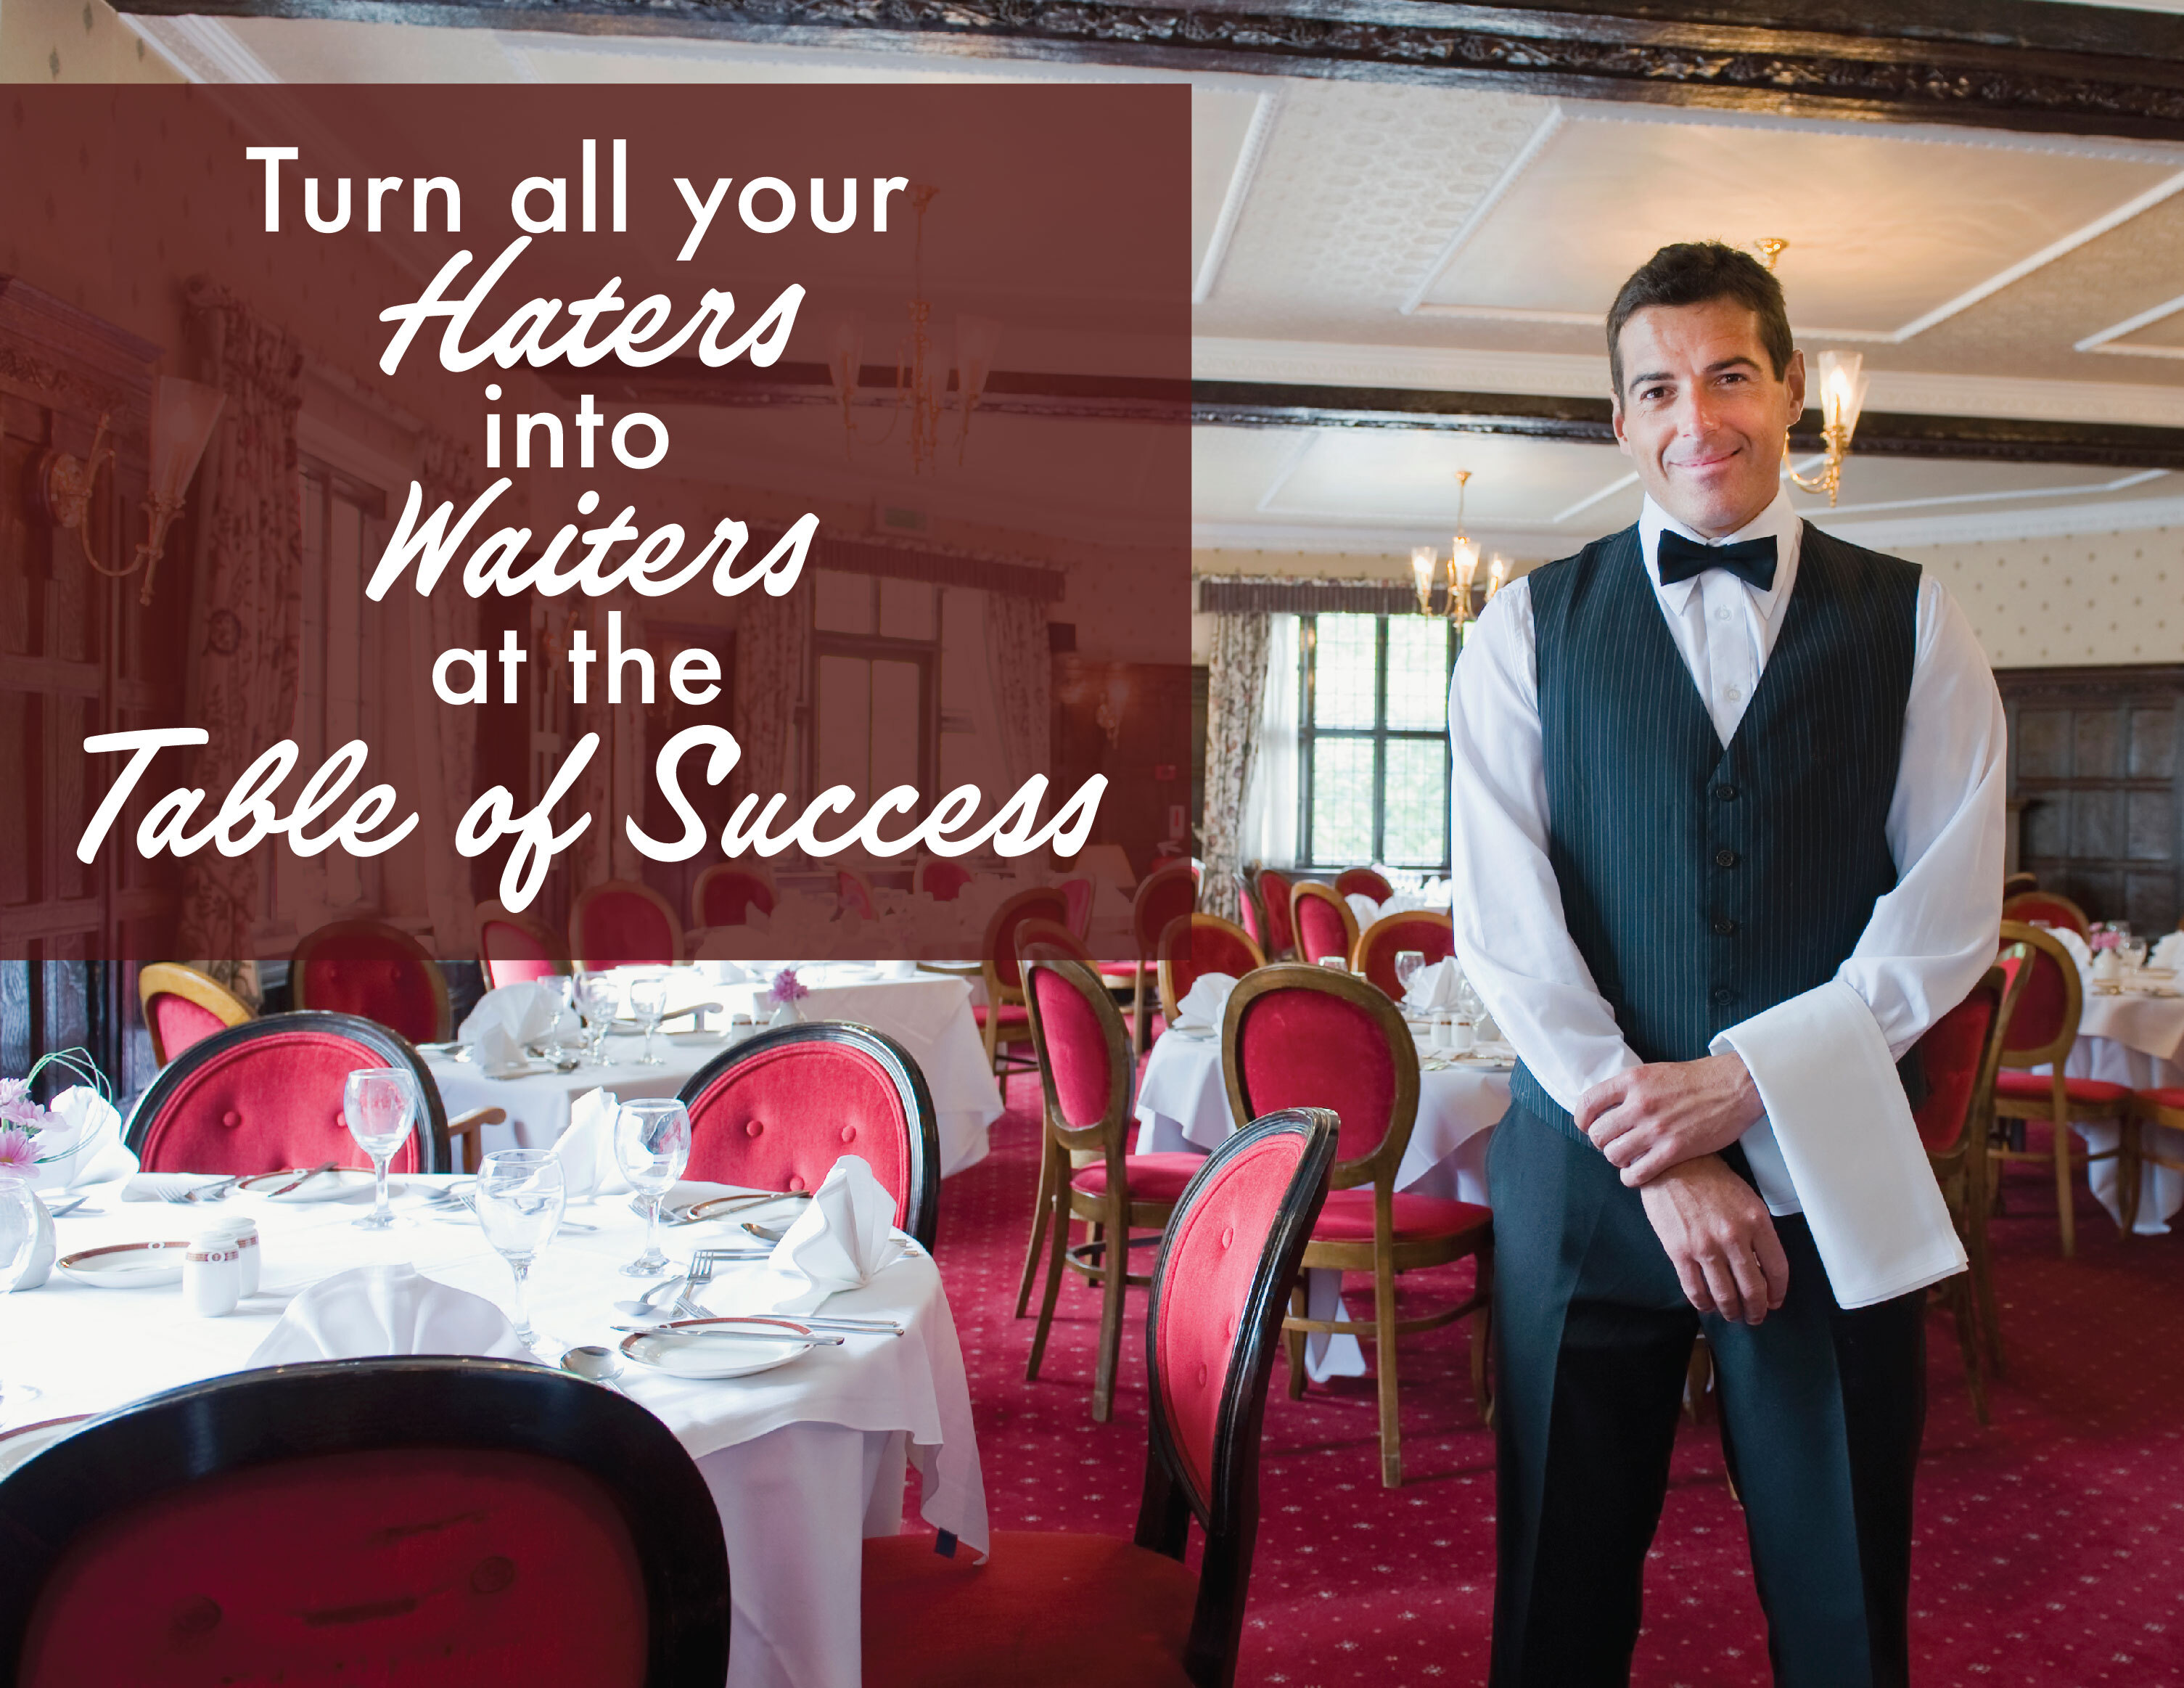 Turn all your Haters into Waiters at the Table of Success